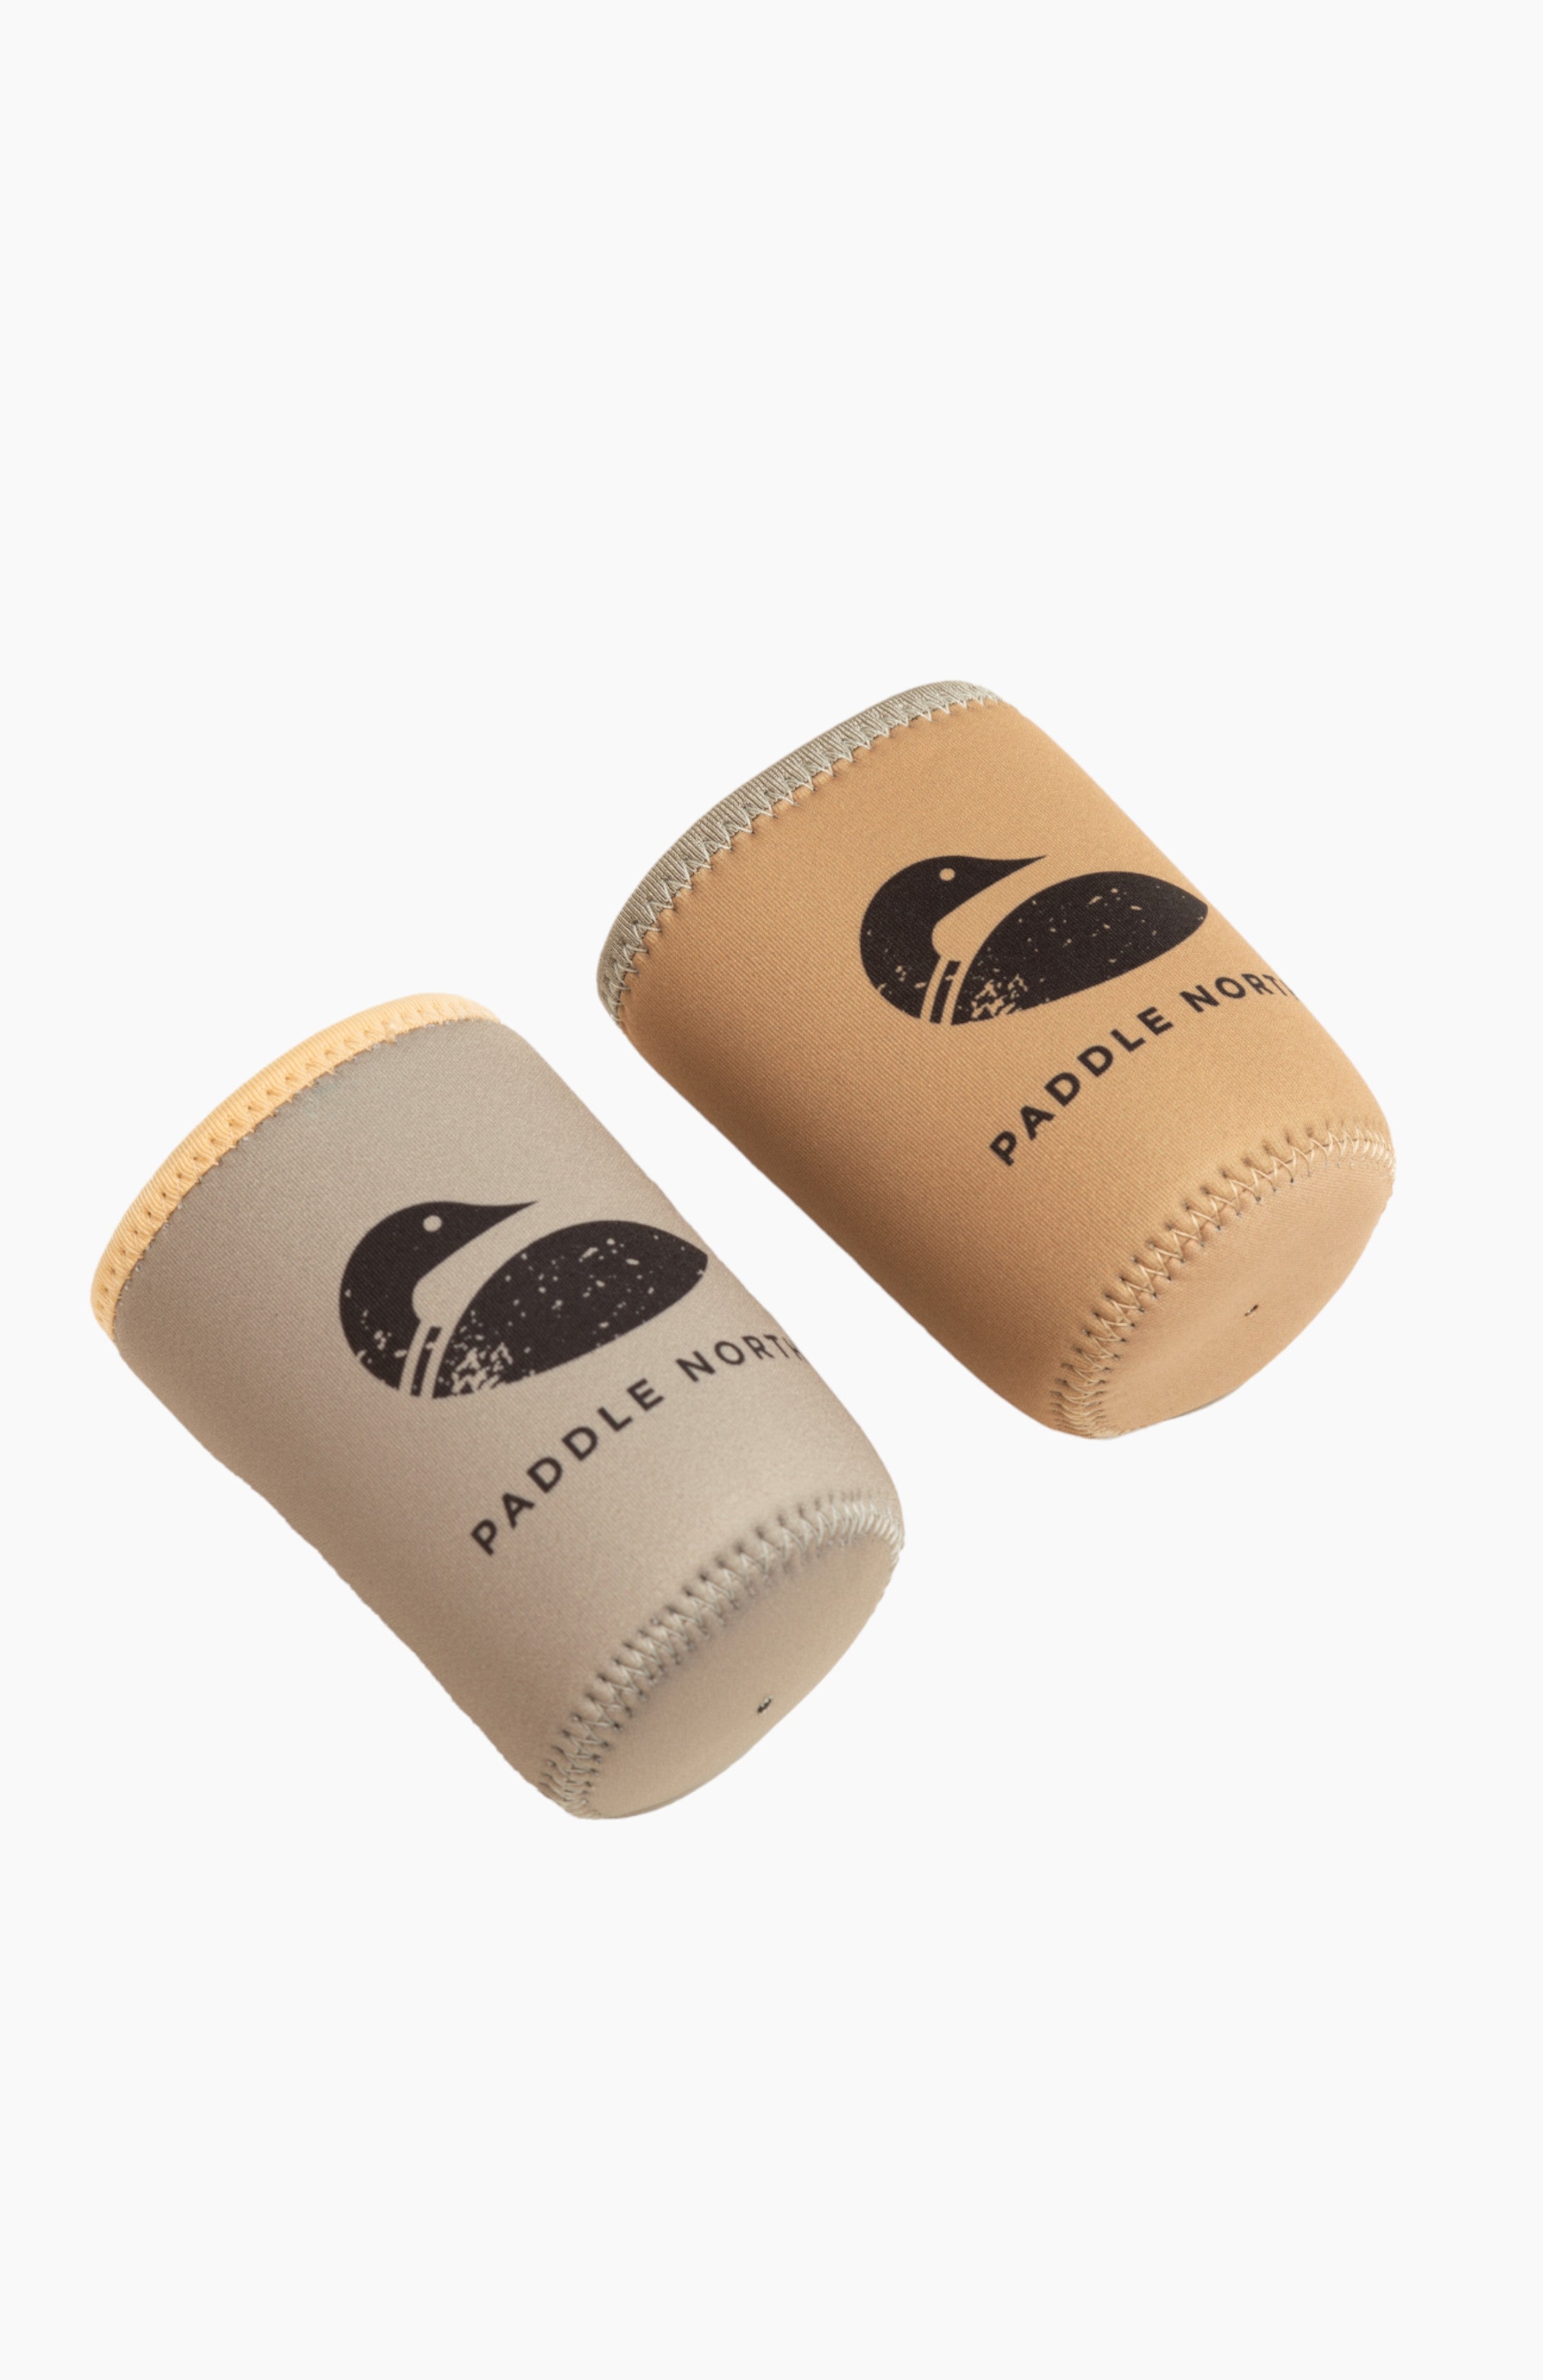 A grey and tan can koozie side be side with the paddle north logo.